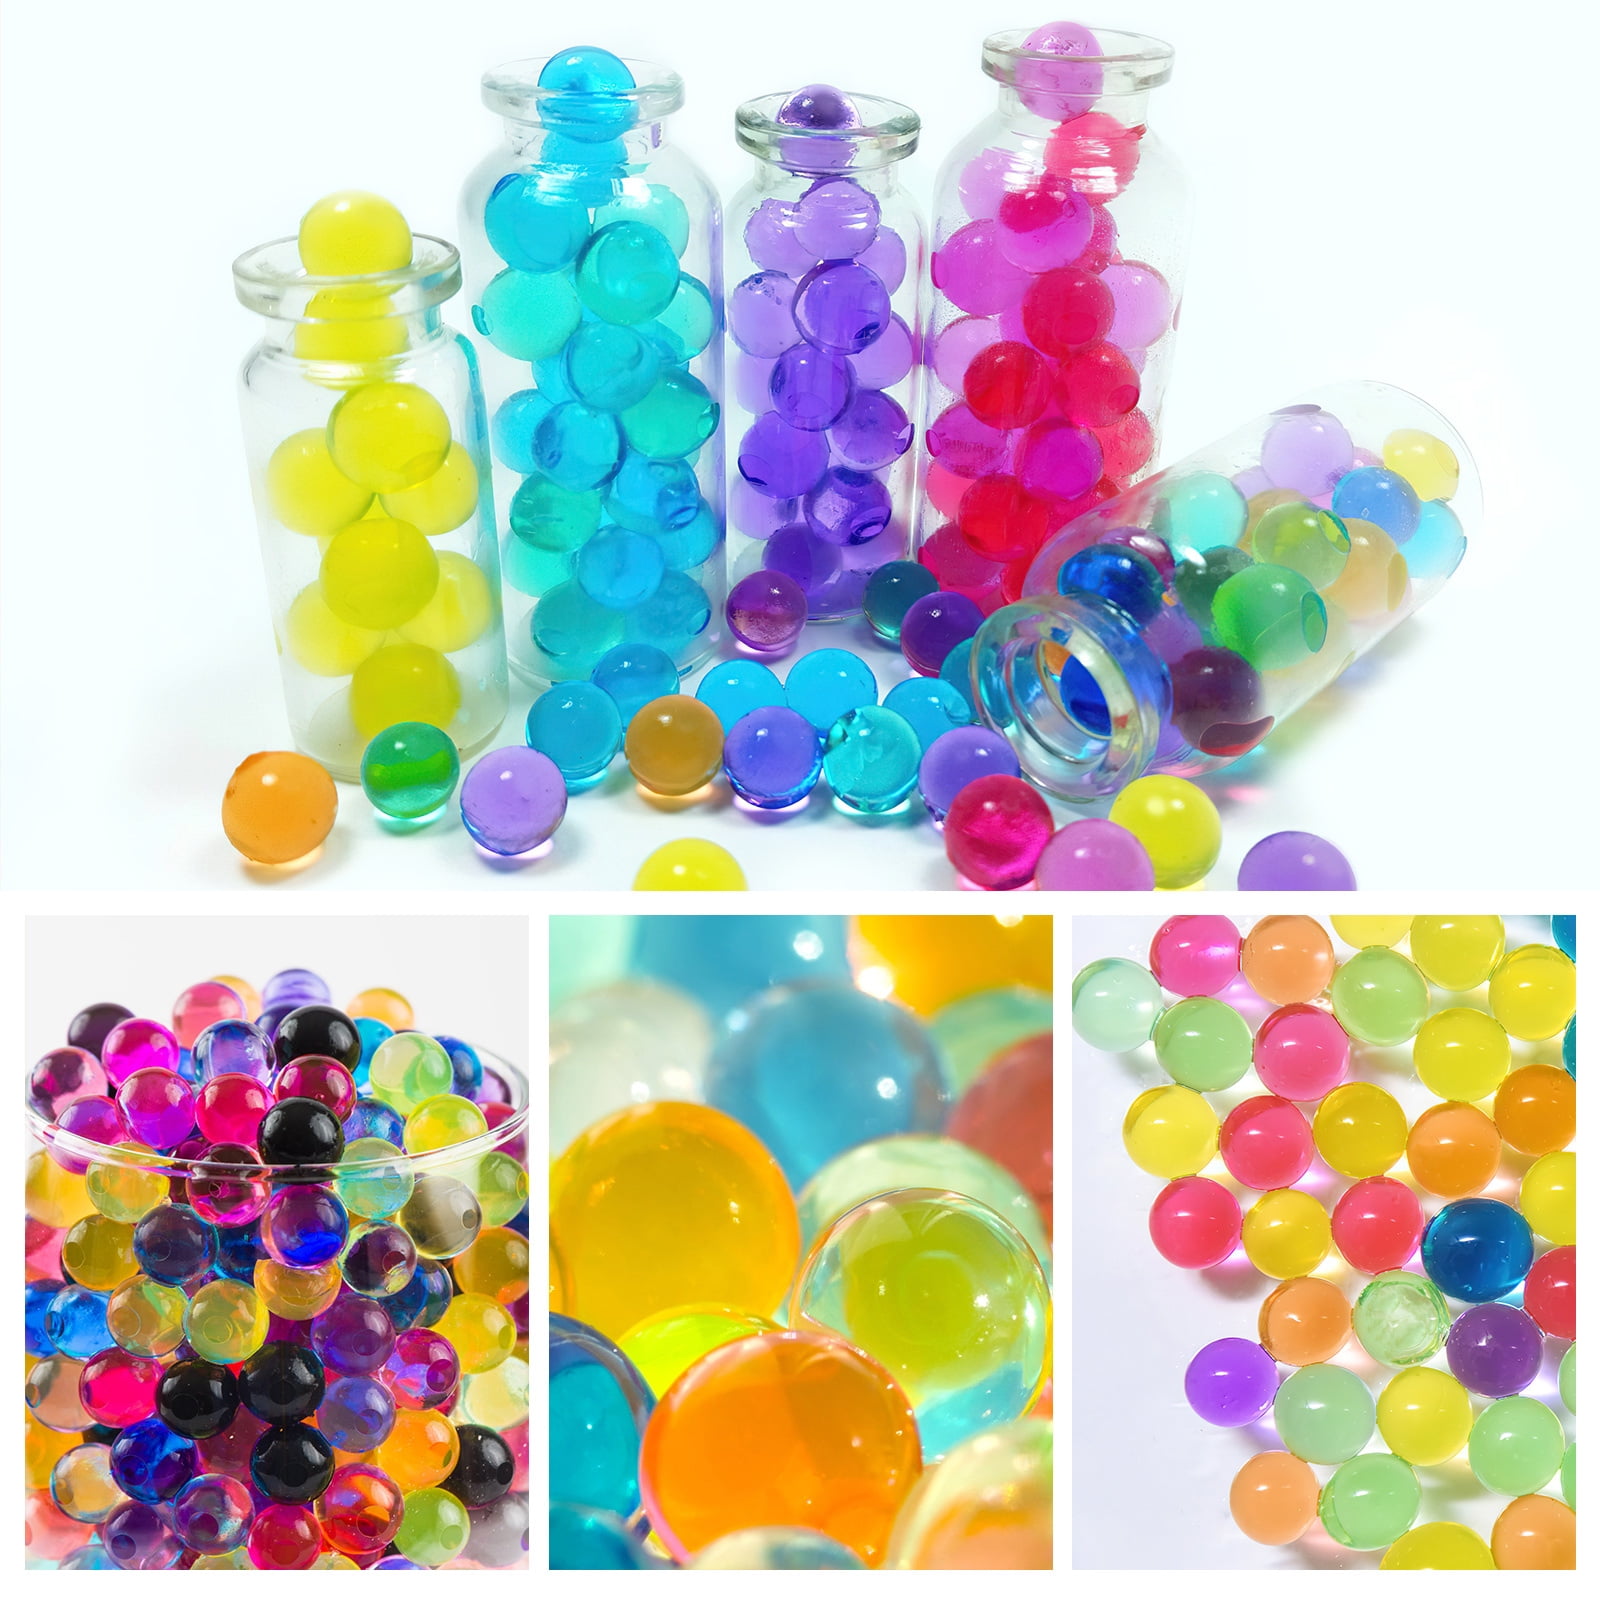 MAGICLUB 70,000 Clear Water Gel Beads for Vases,Transparent Gel Water  Pearls Bead,Vase Fillers for Floating Pearls, Floating Candle  Making,Wedding